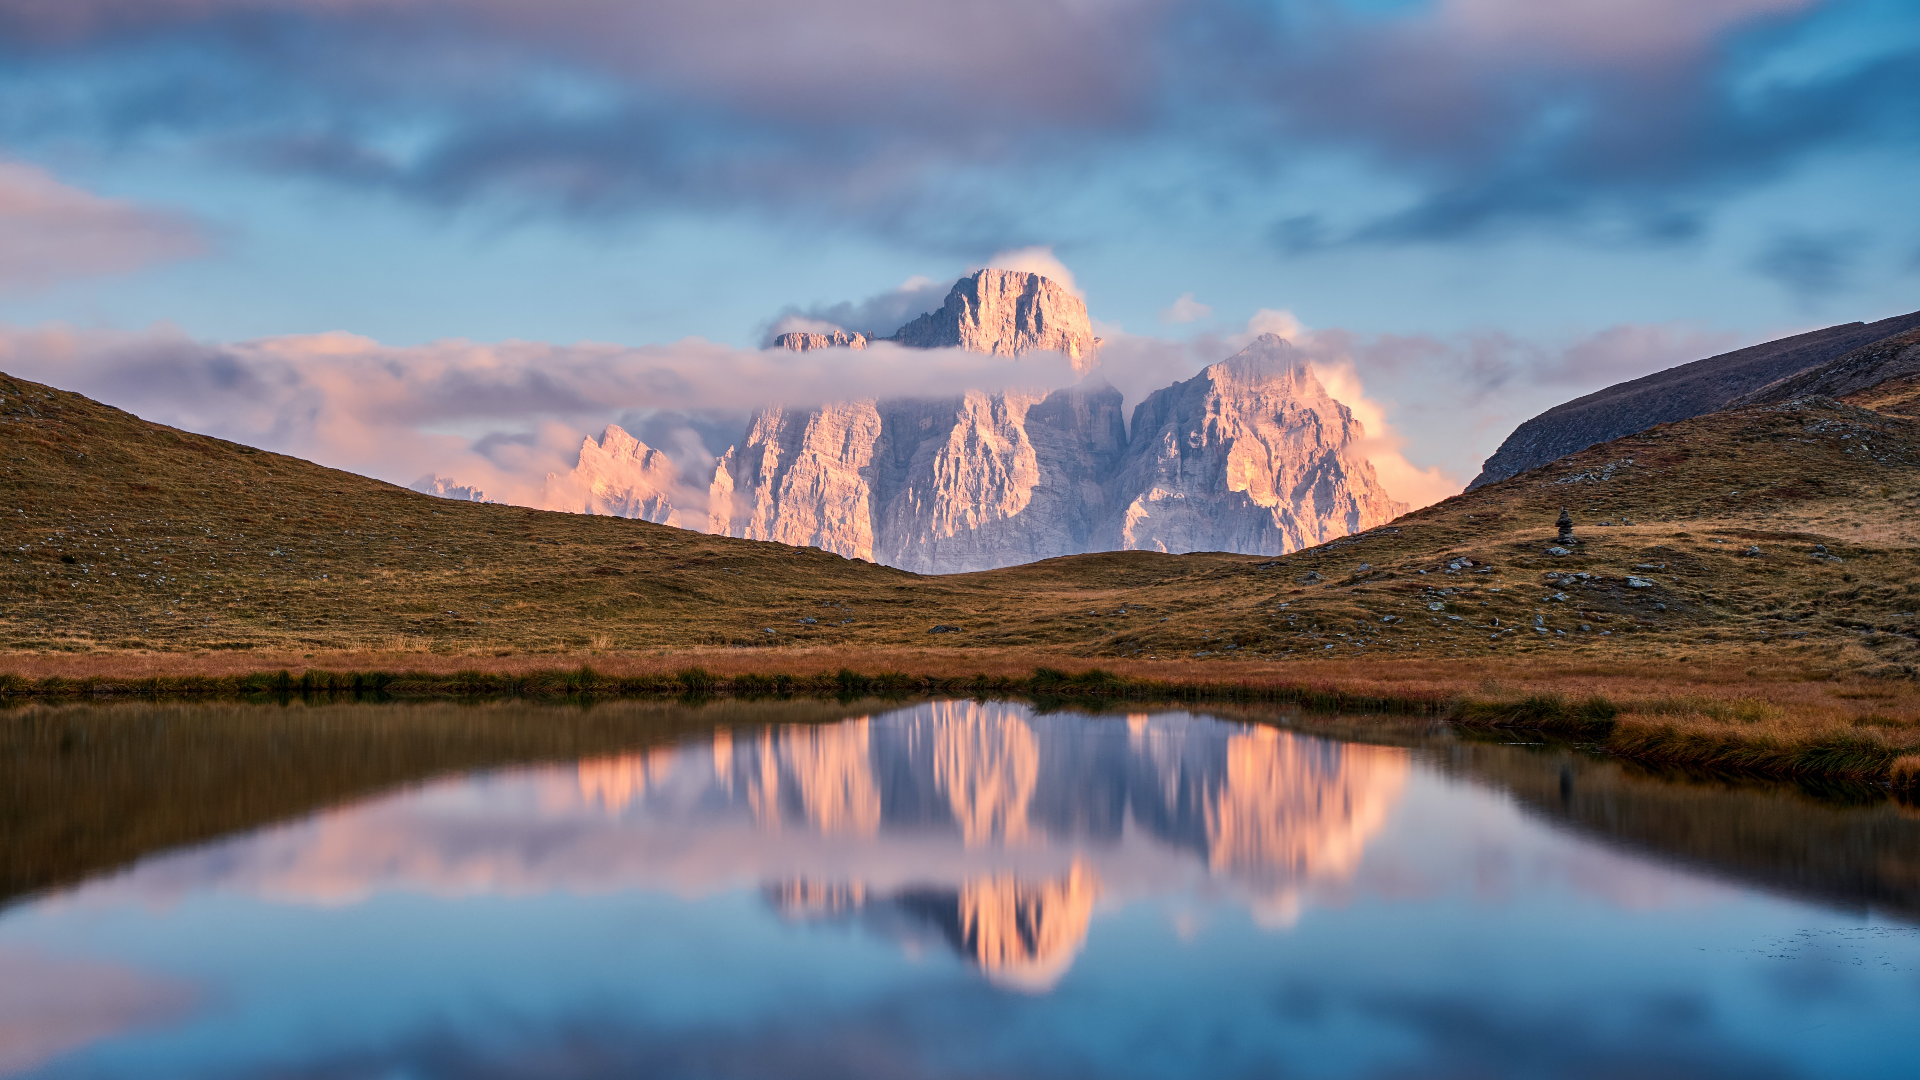 General 1920x1080 nature landscape clouds lake water mountains hills rocks sky Dolomites Italy